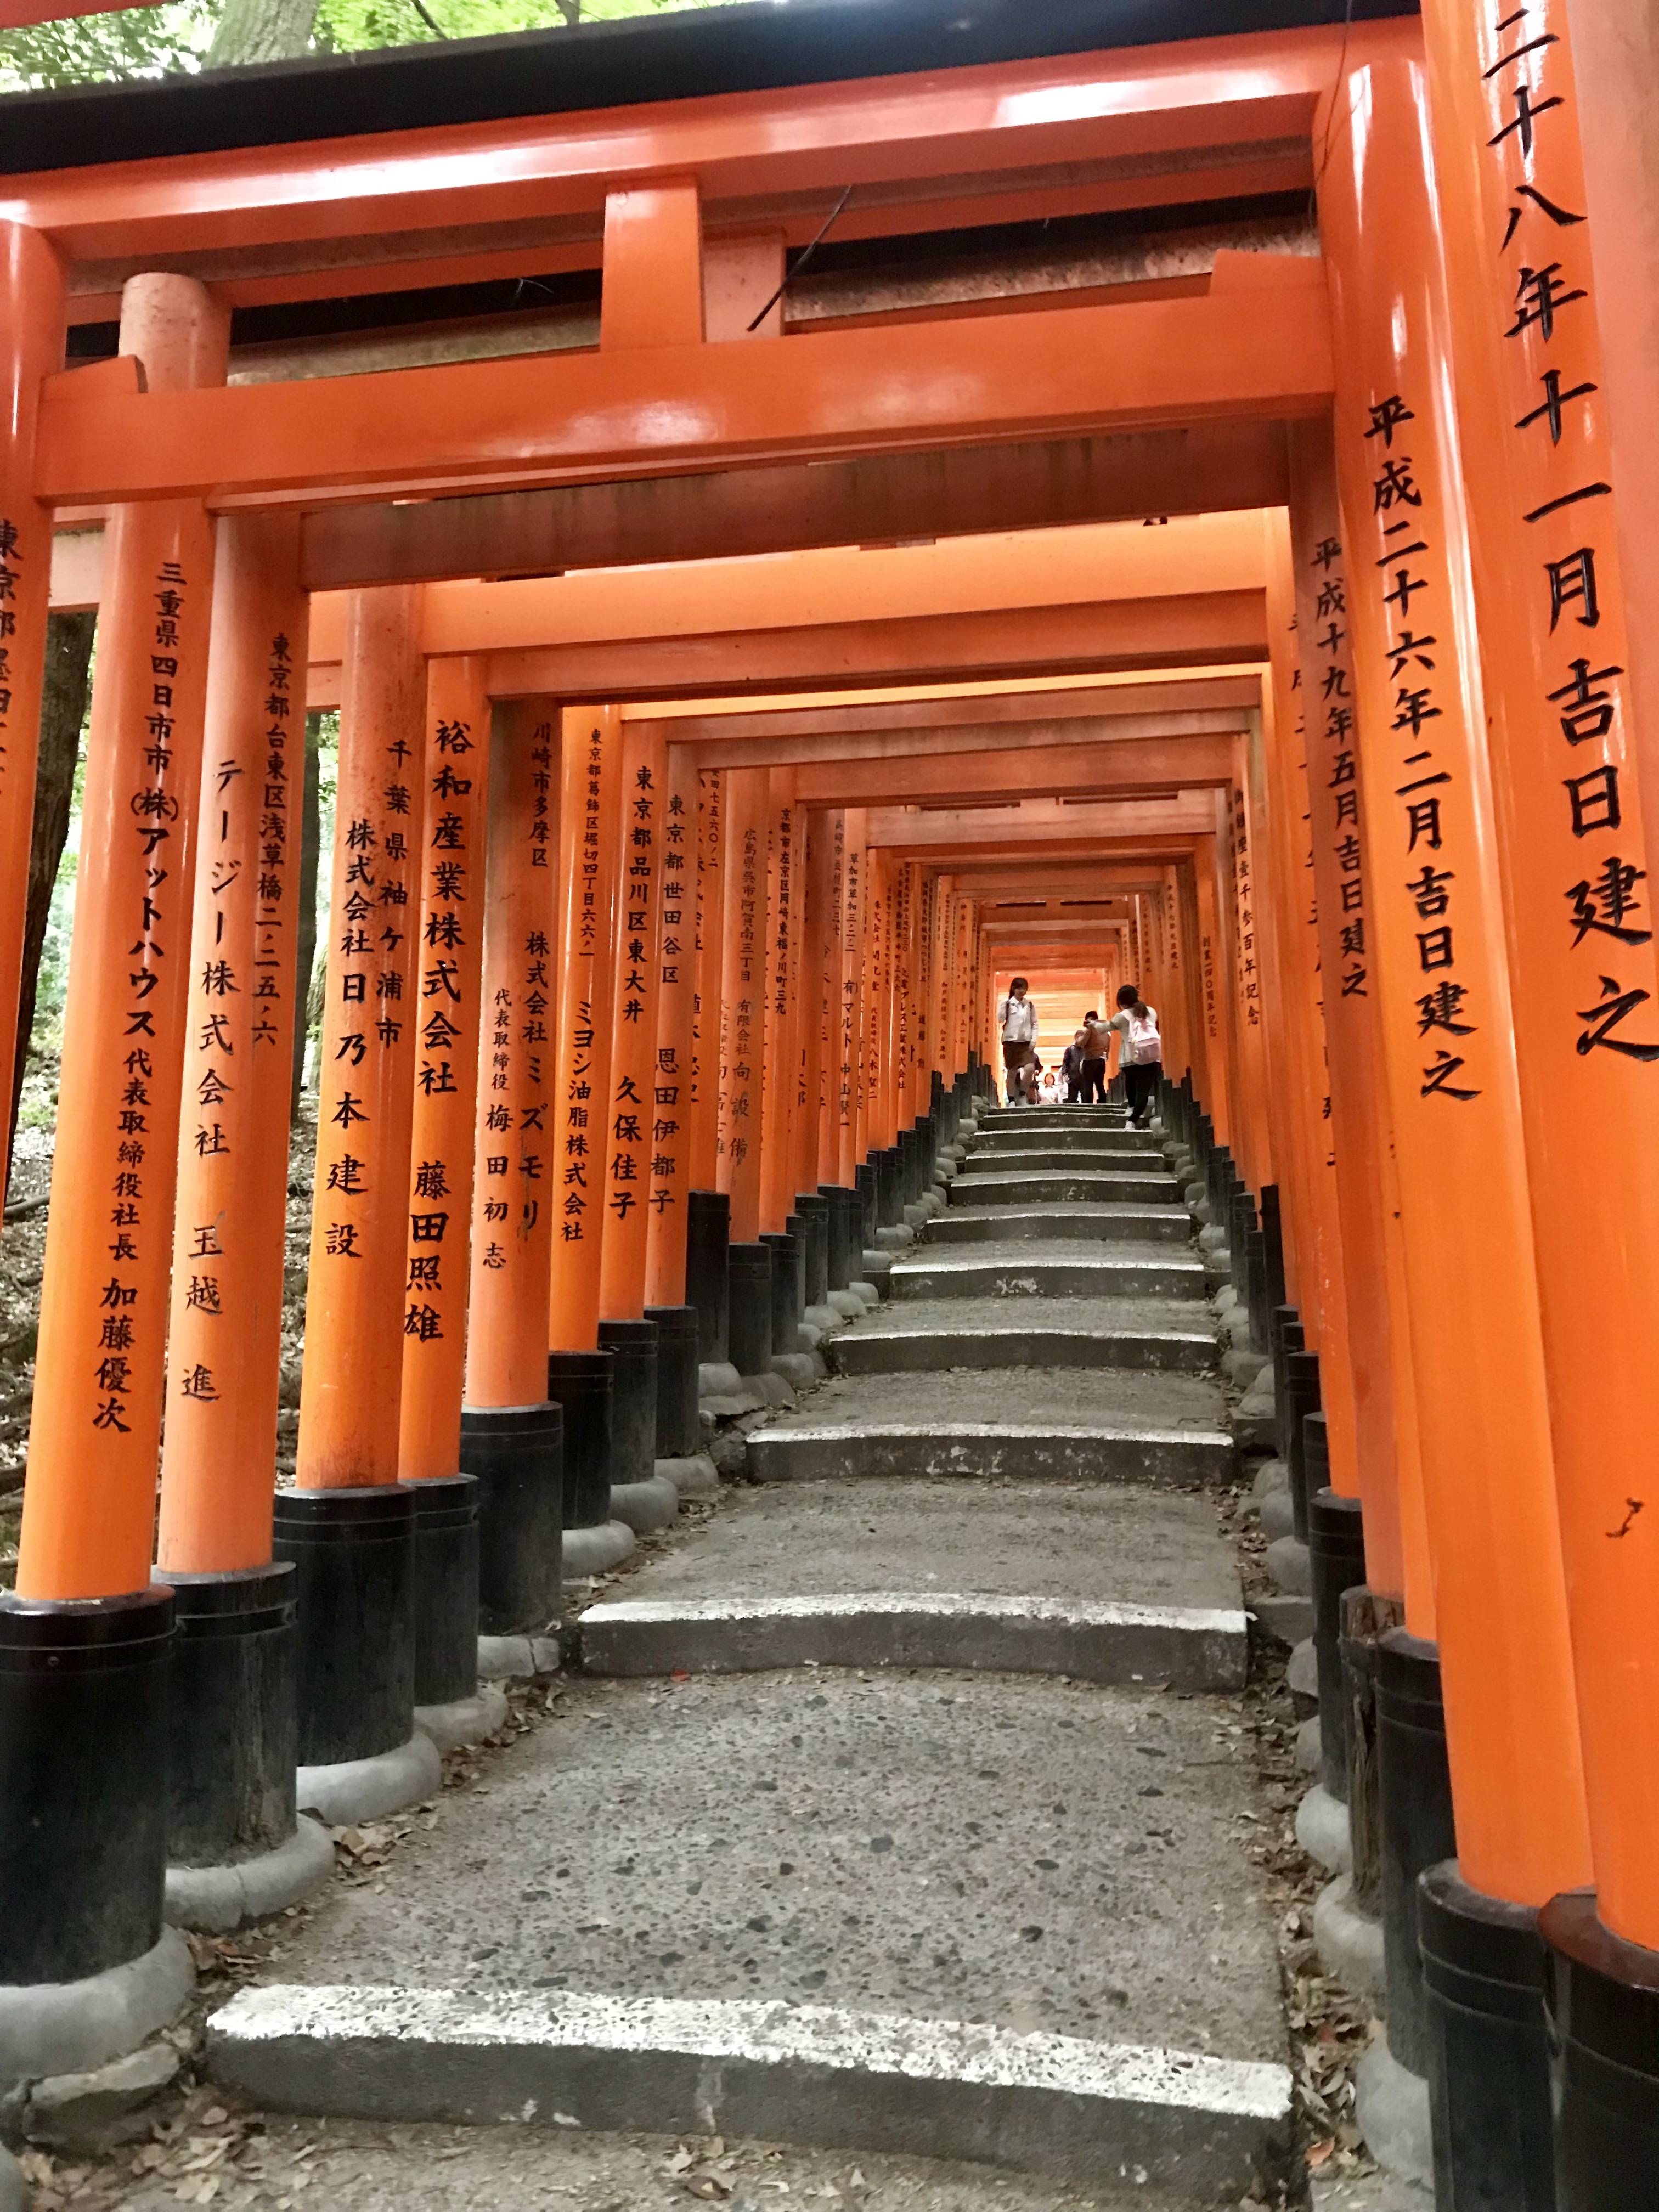 10 Best Things To Do in Kyoto for an Awesome Kyoto Itinerary